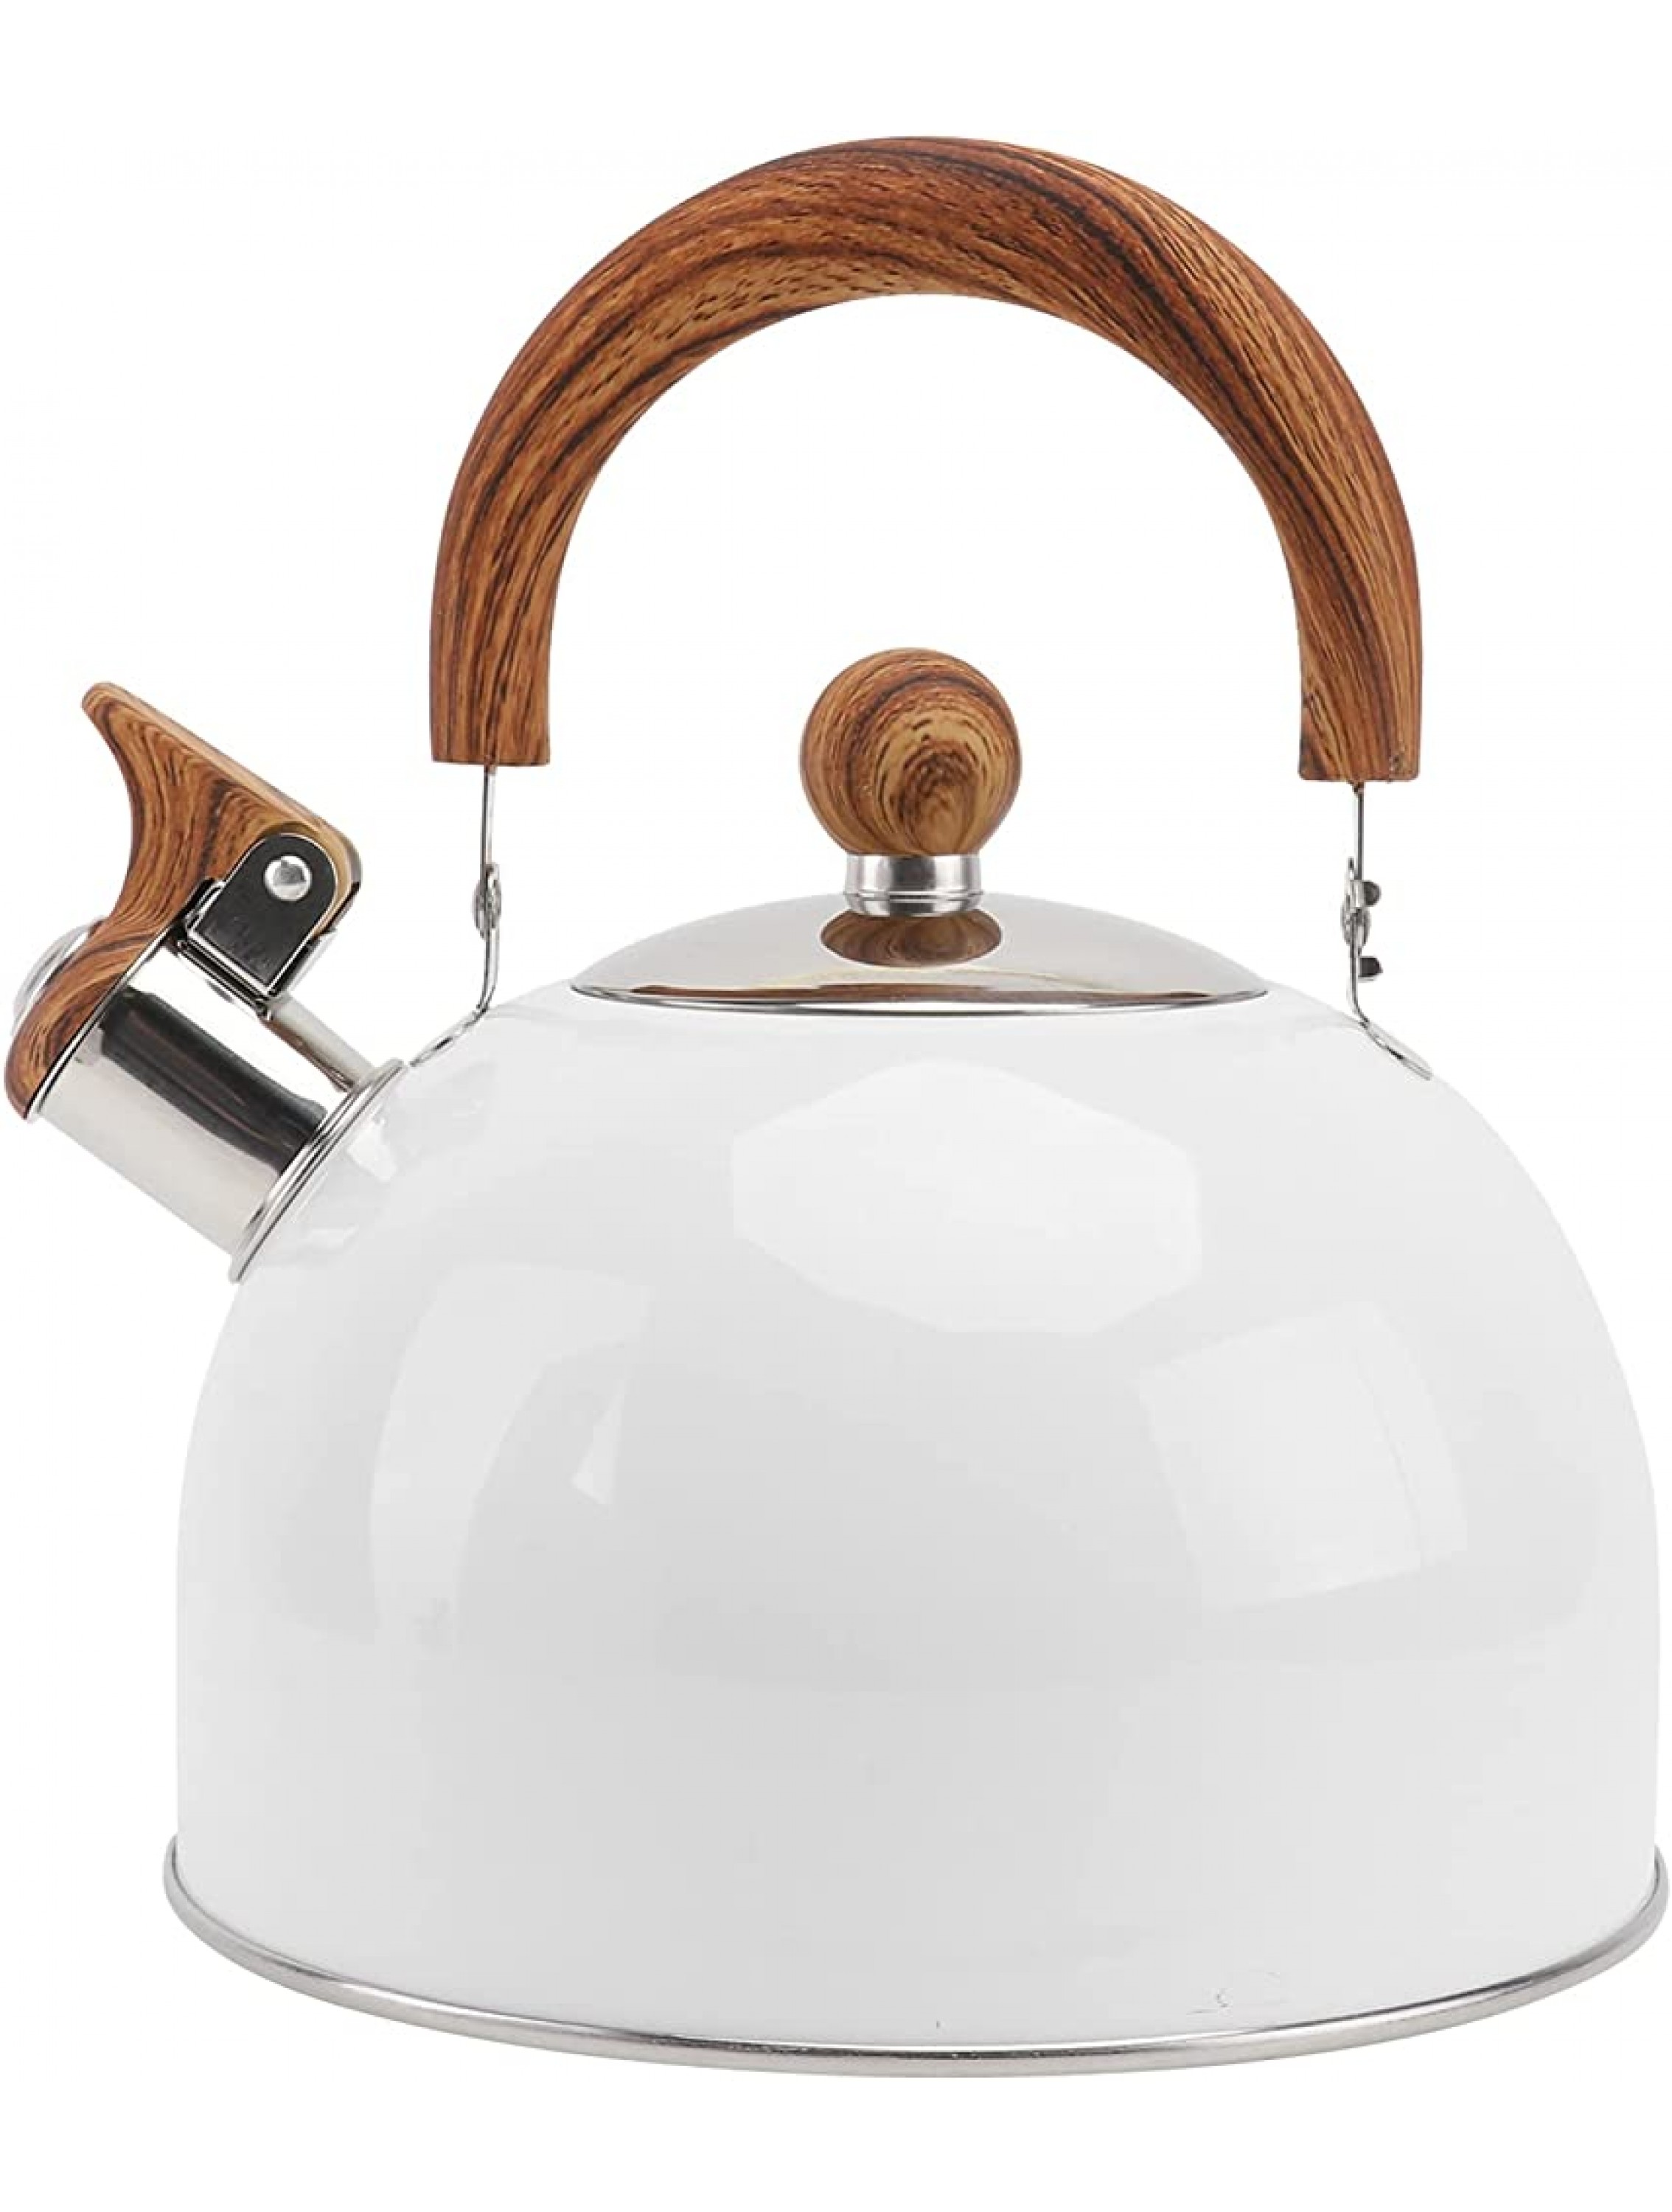 Cabilock Tea Kettle for Stove Top Stainless Steel Tea Kettle Stovetop Whistling Tea Kettle with Cool Toch Ergonomic Handle 2. 5L White - B4Y26UI9C